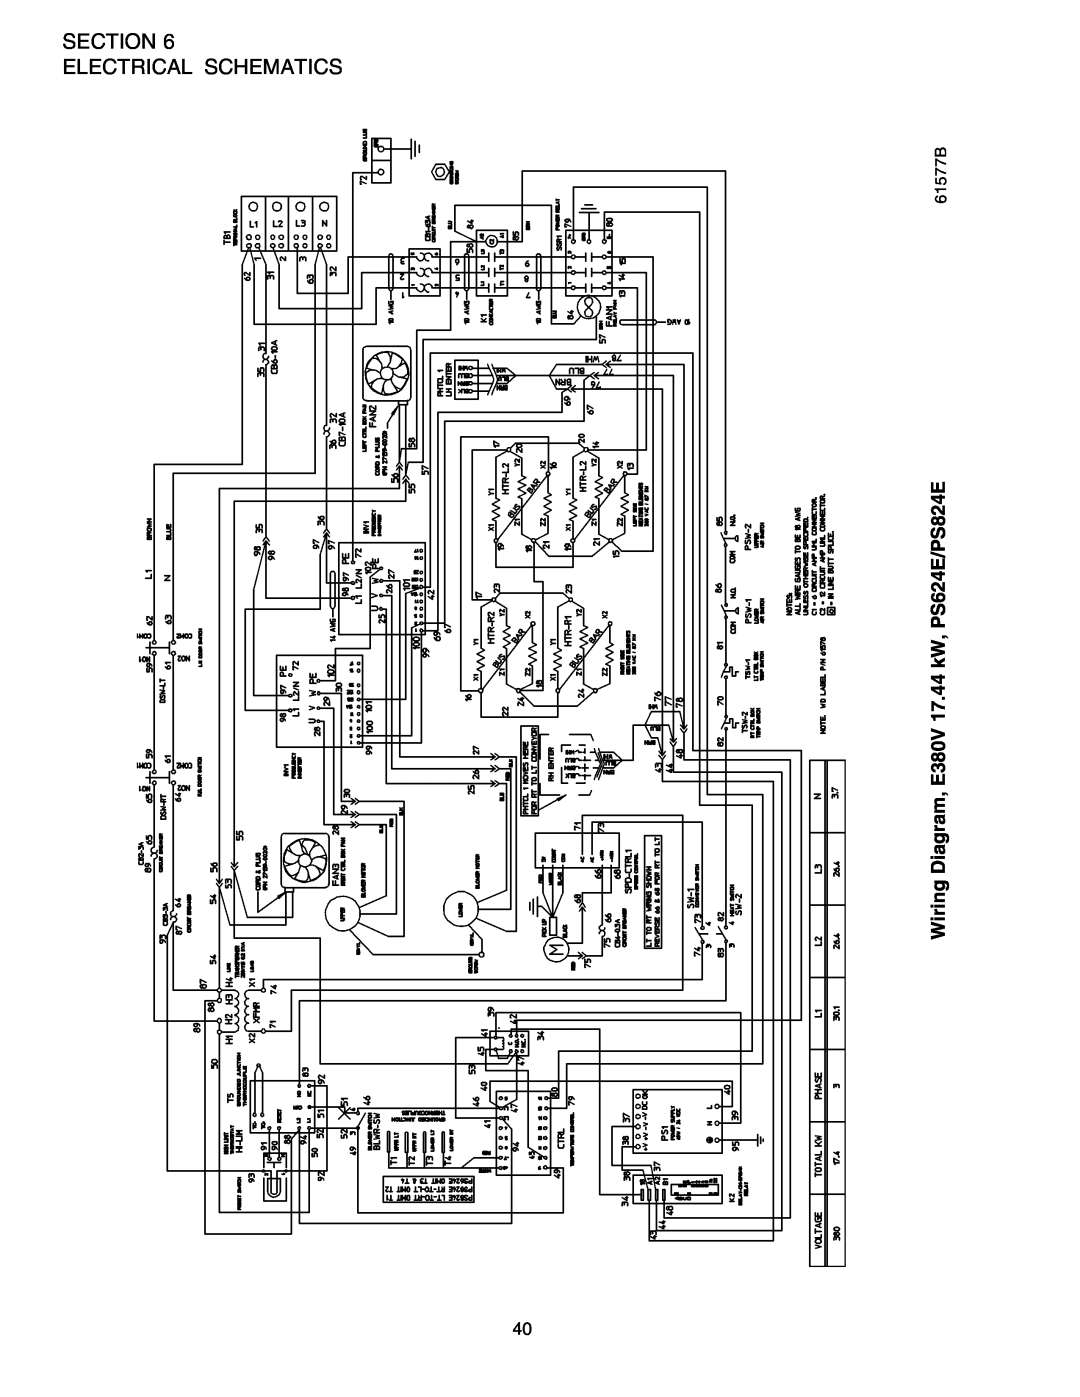 Middleby Marshall Section Electrical Schematics, Wiring Diagram, E380V 17.44 kW, PS624E/PS824E, 61577B 